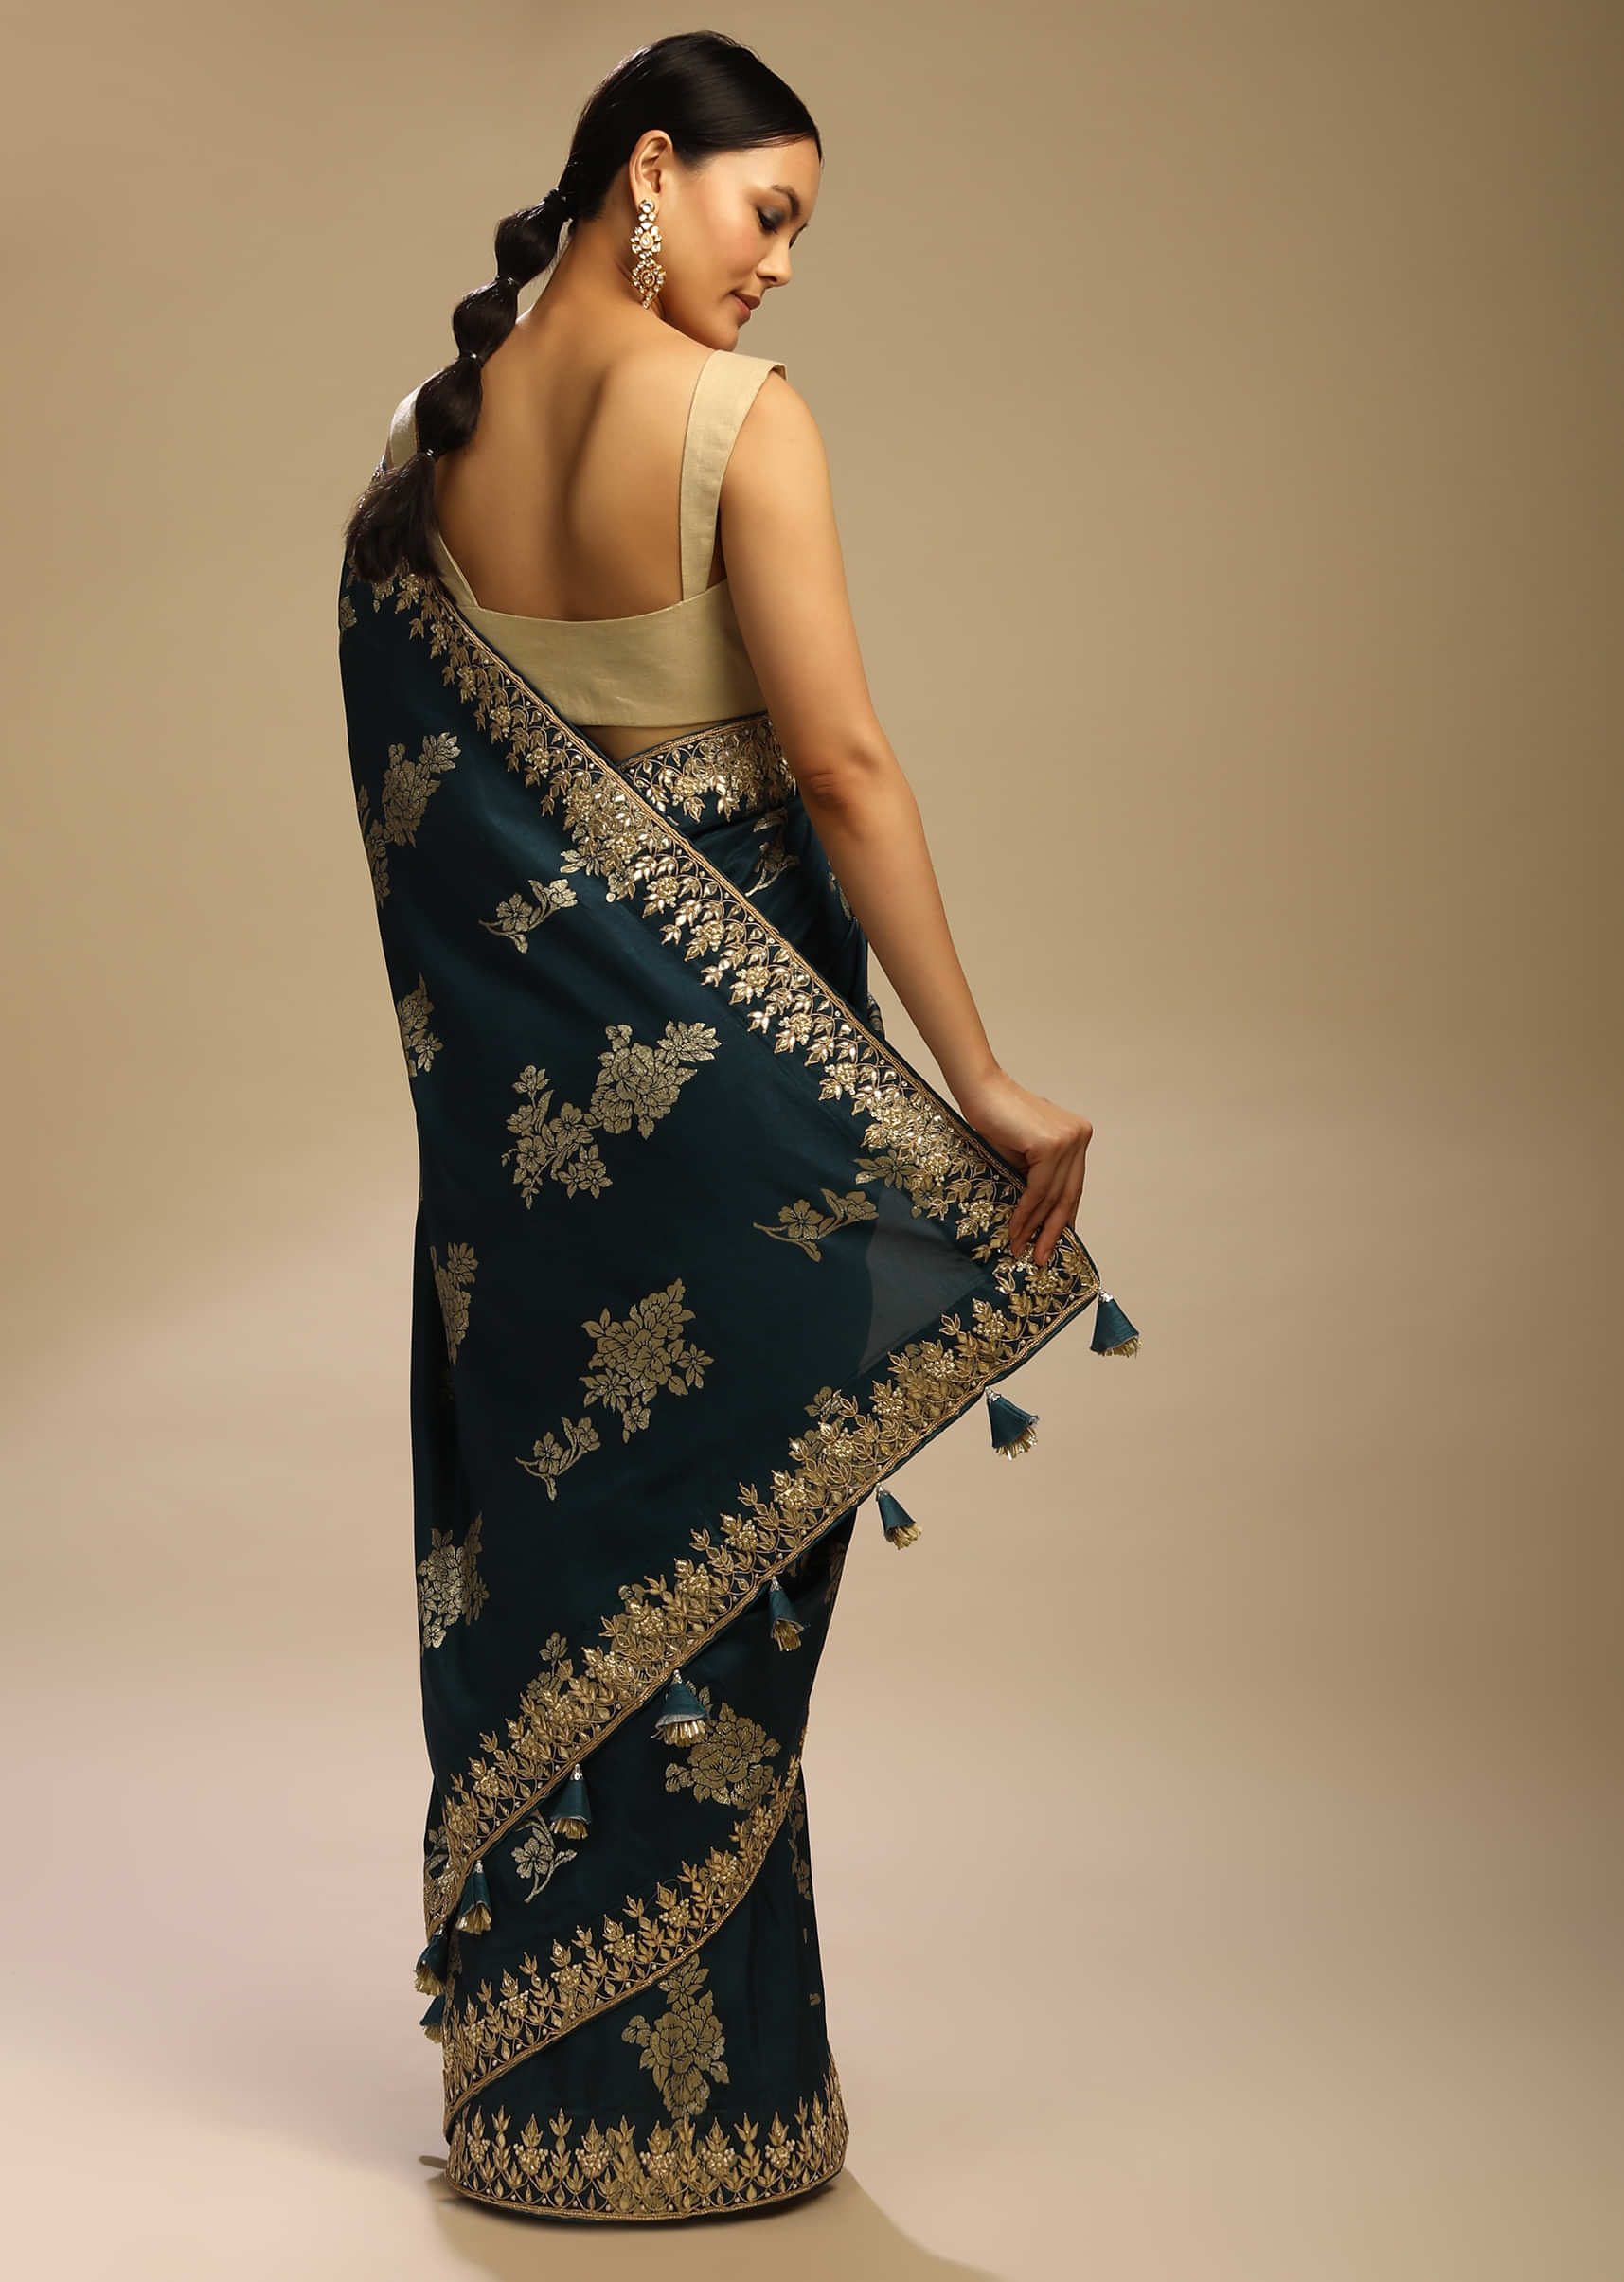 Peacock Blue Saree In Dupion Silk With Woven Floral Motifs And Gotta Embroidered Floral Border